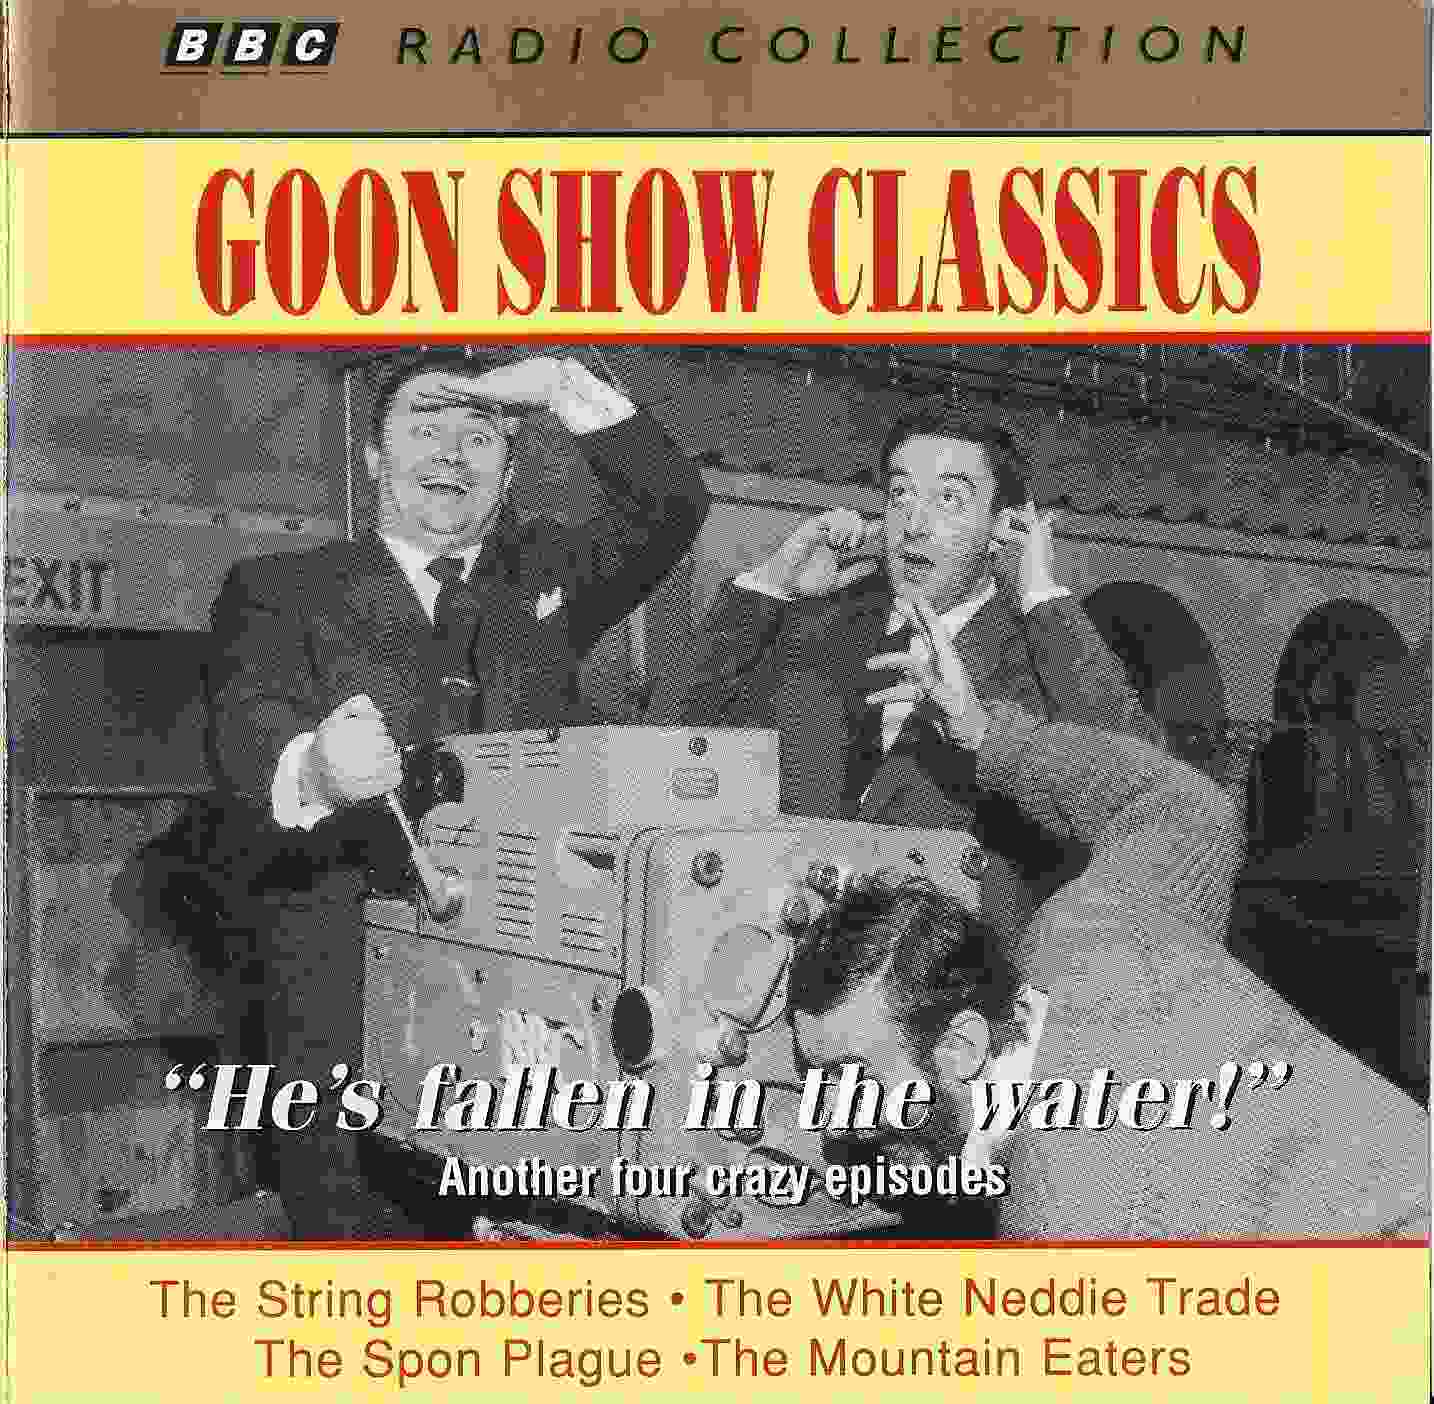 Picture of Goon show classics 11 - He's fallen in the water by artist Spike Milligan / Larry Stephens from the BBC cds - Records and Tapes library